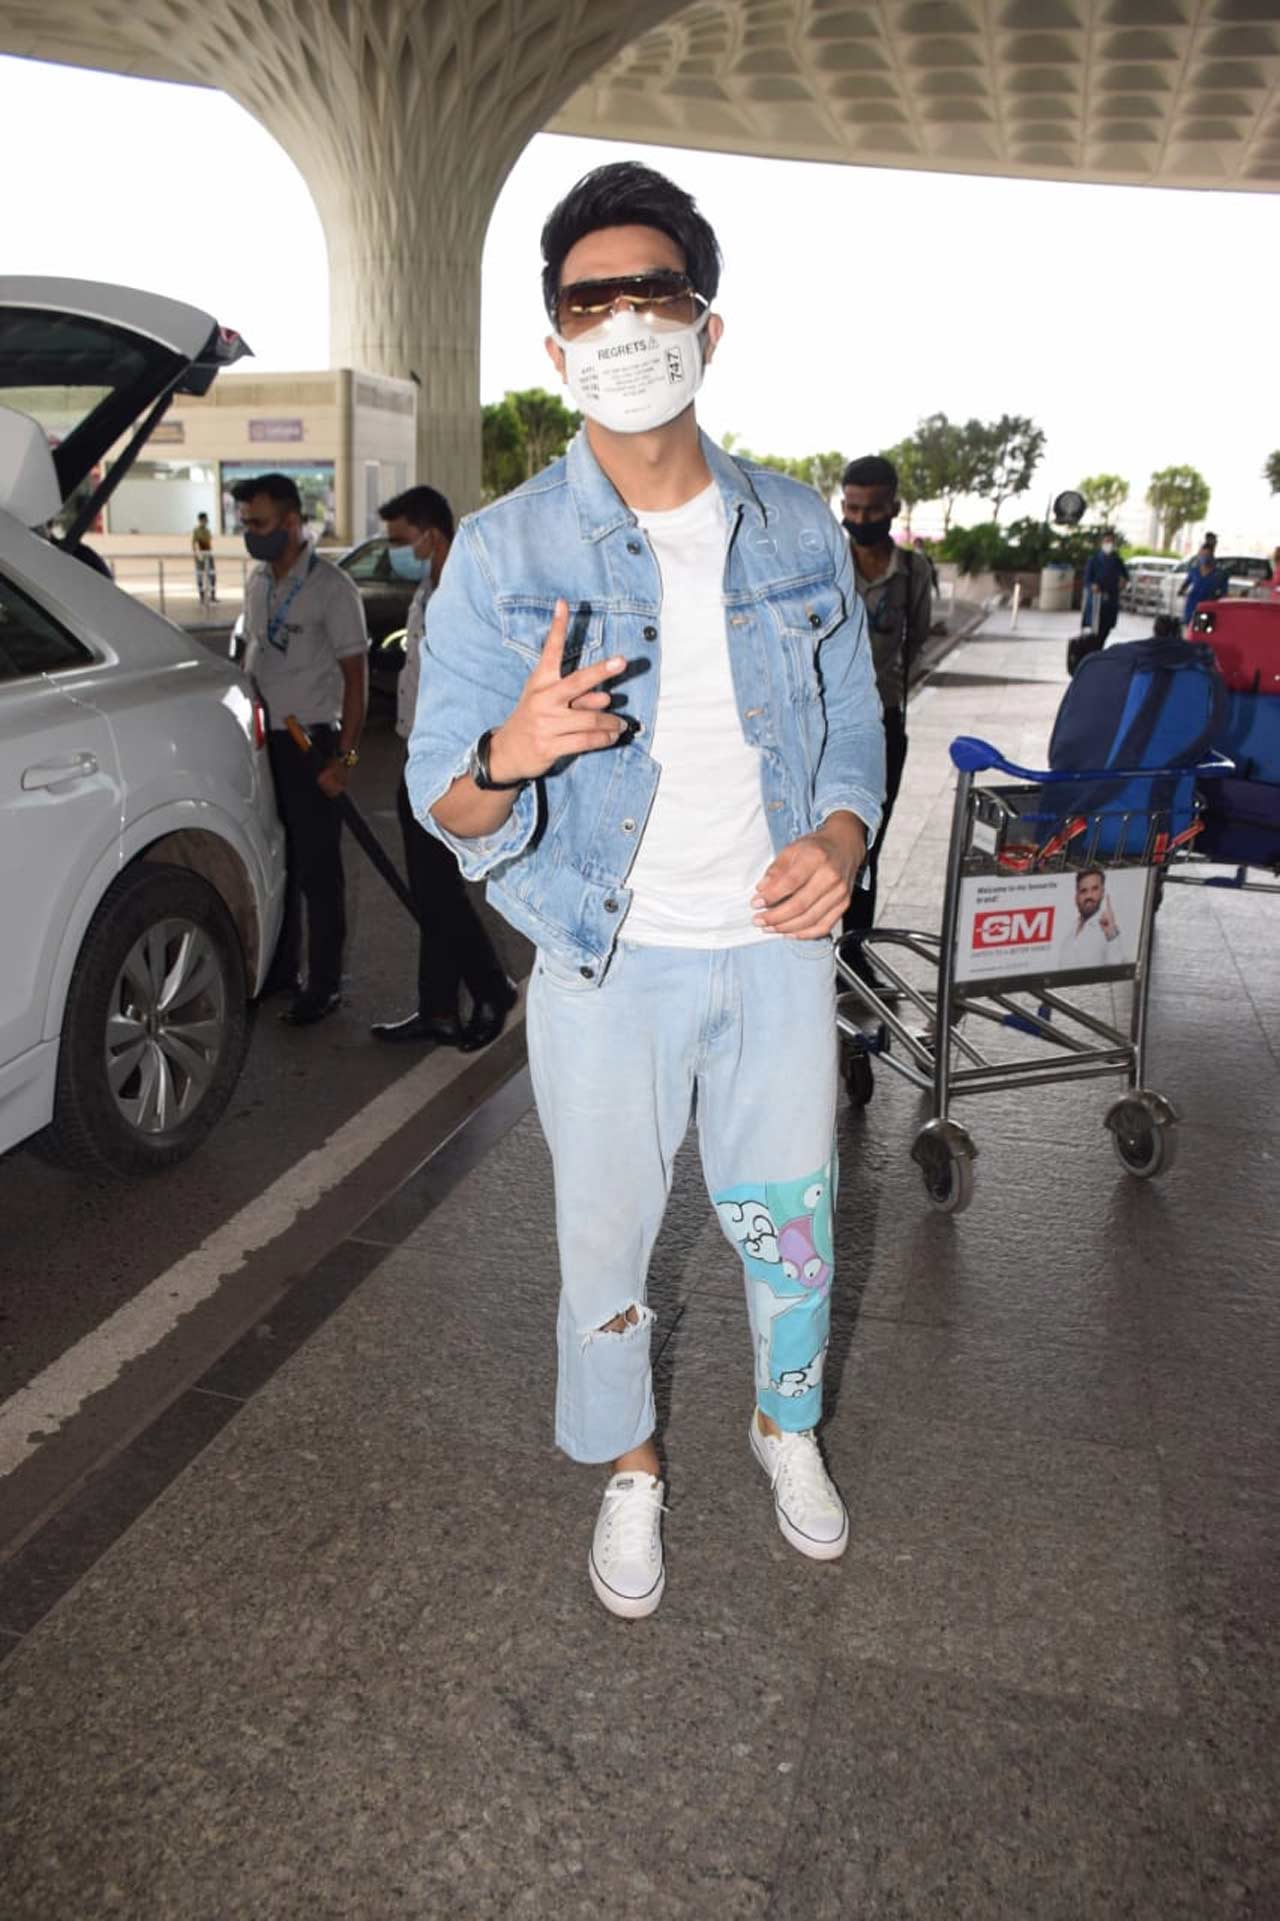 Aparshakti Khurana's denim on denim airport look seemed like a perfect casual pick. What do you guys think? Speaking about his professional journey, Aparshakti is all set to make his lead debut opposite Pranutan in 'Helmet.' On the other hand, Aparshakti and his wife are all set to embrace parenthood soon.